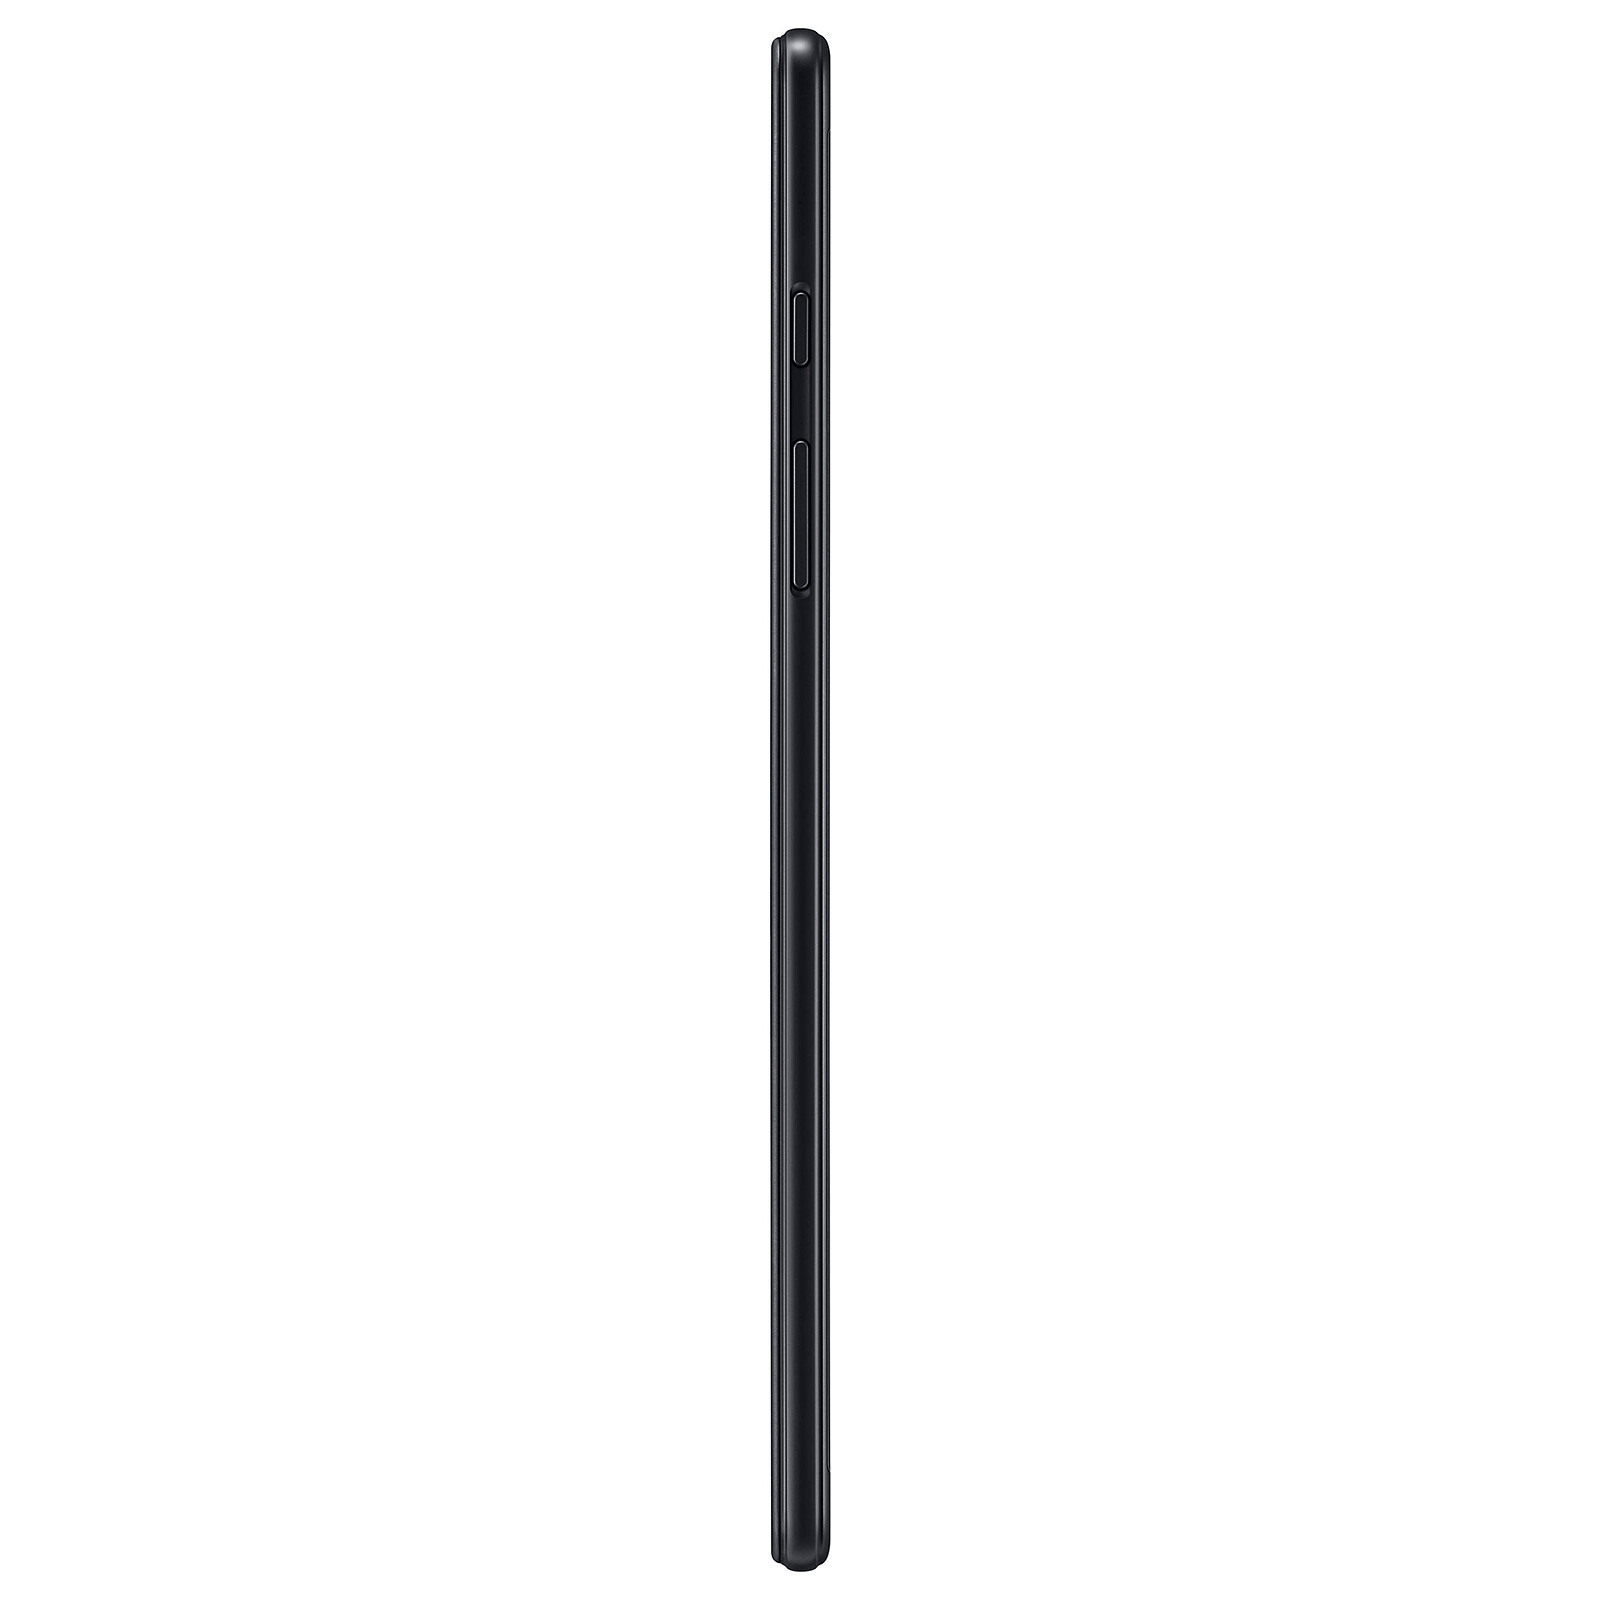 Tablette tactile Samsung Galaxy Tab A SM-T295